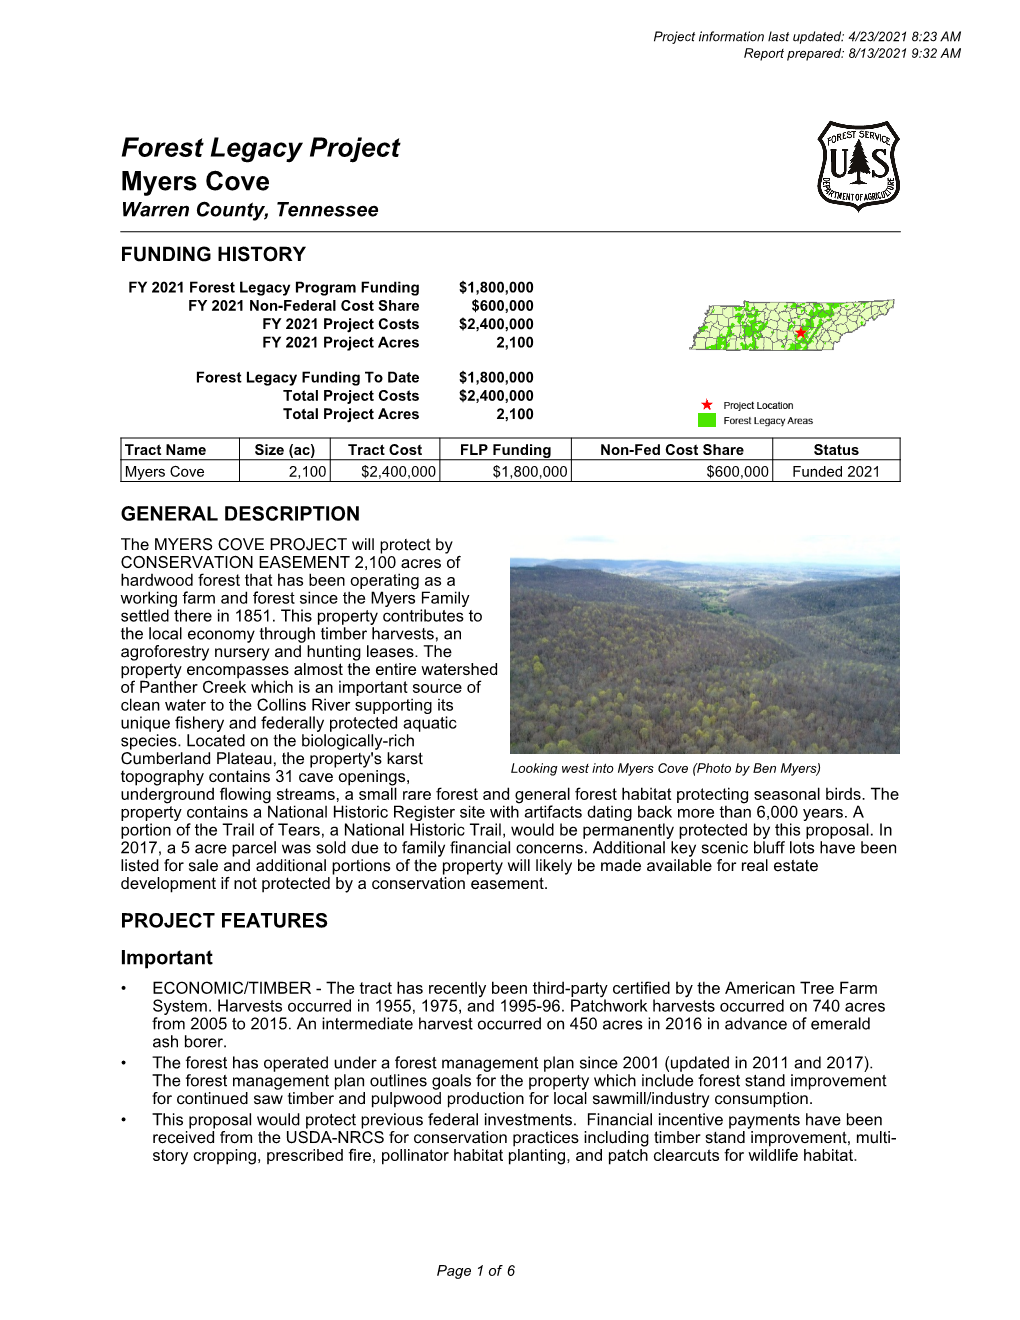 Forest Legacy Project Myers Cove Warren County, Tennessee